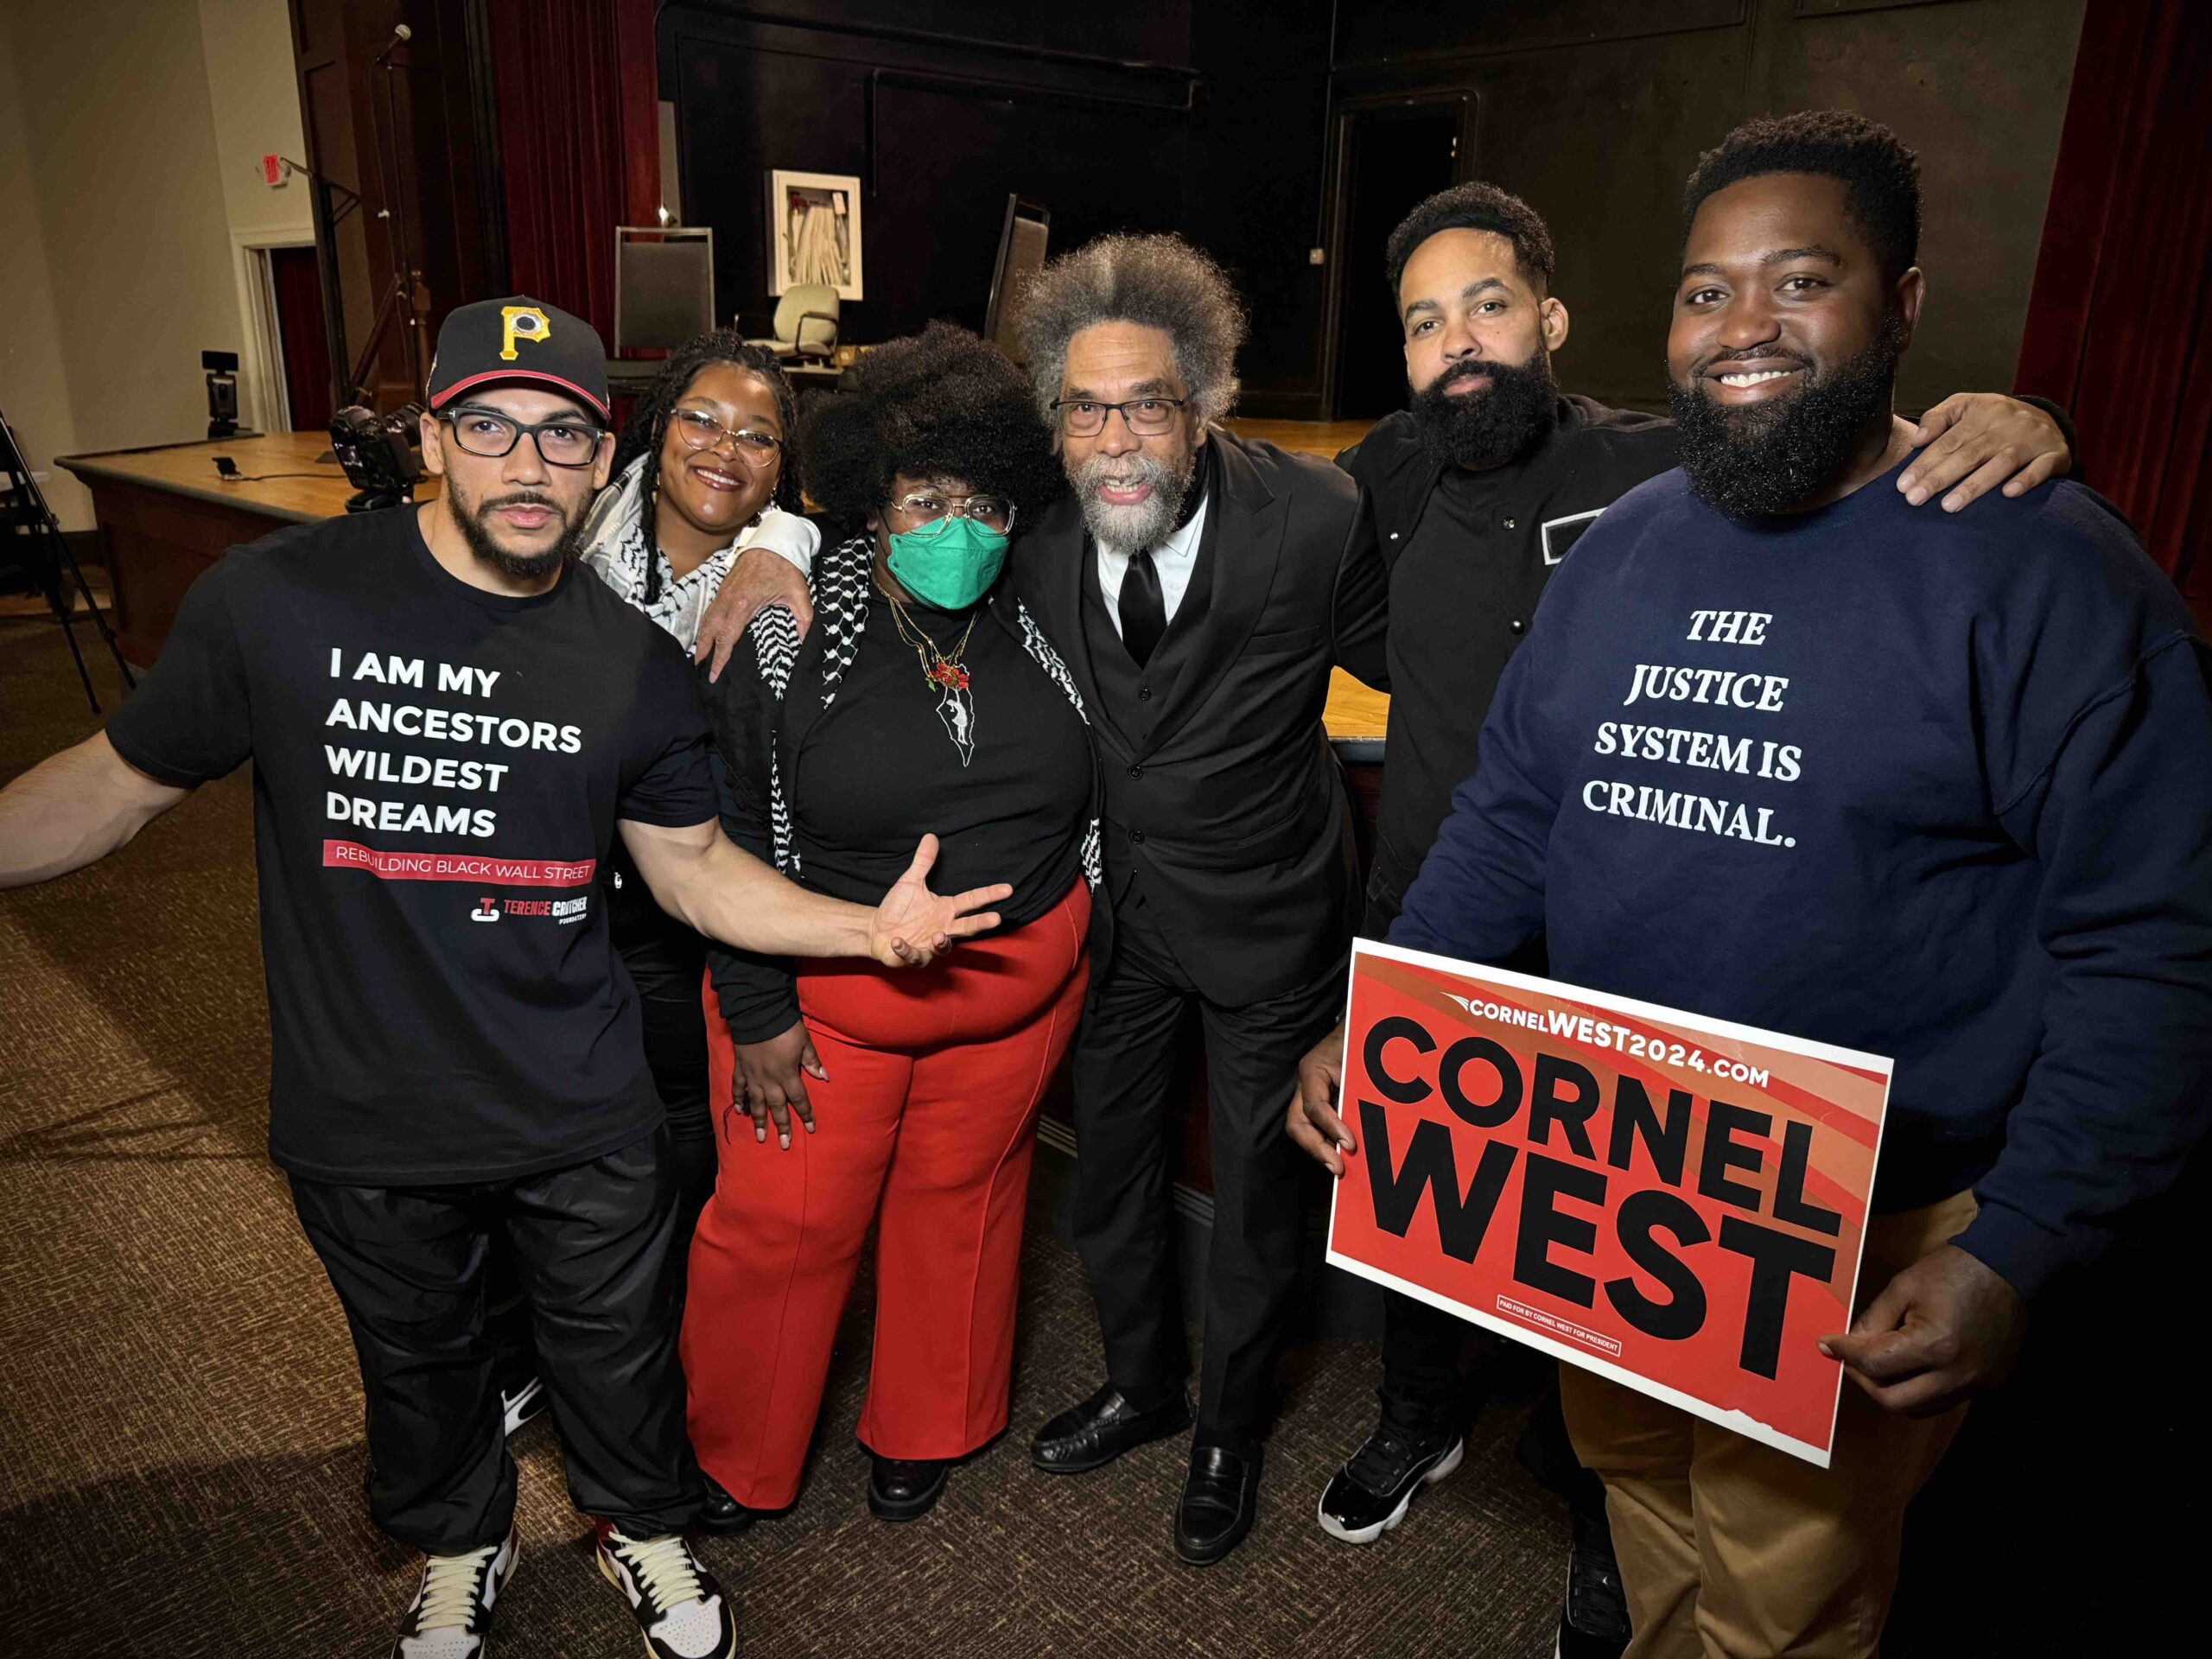 Dr. Cornel West visits Pittsburgh